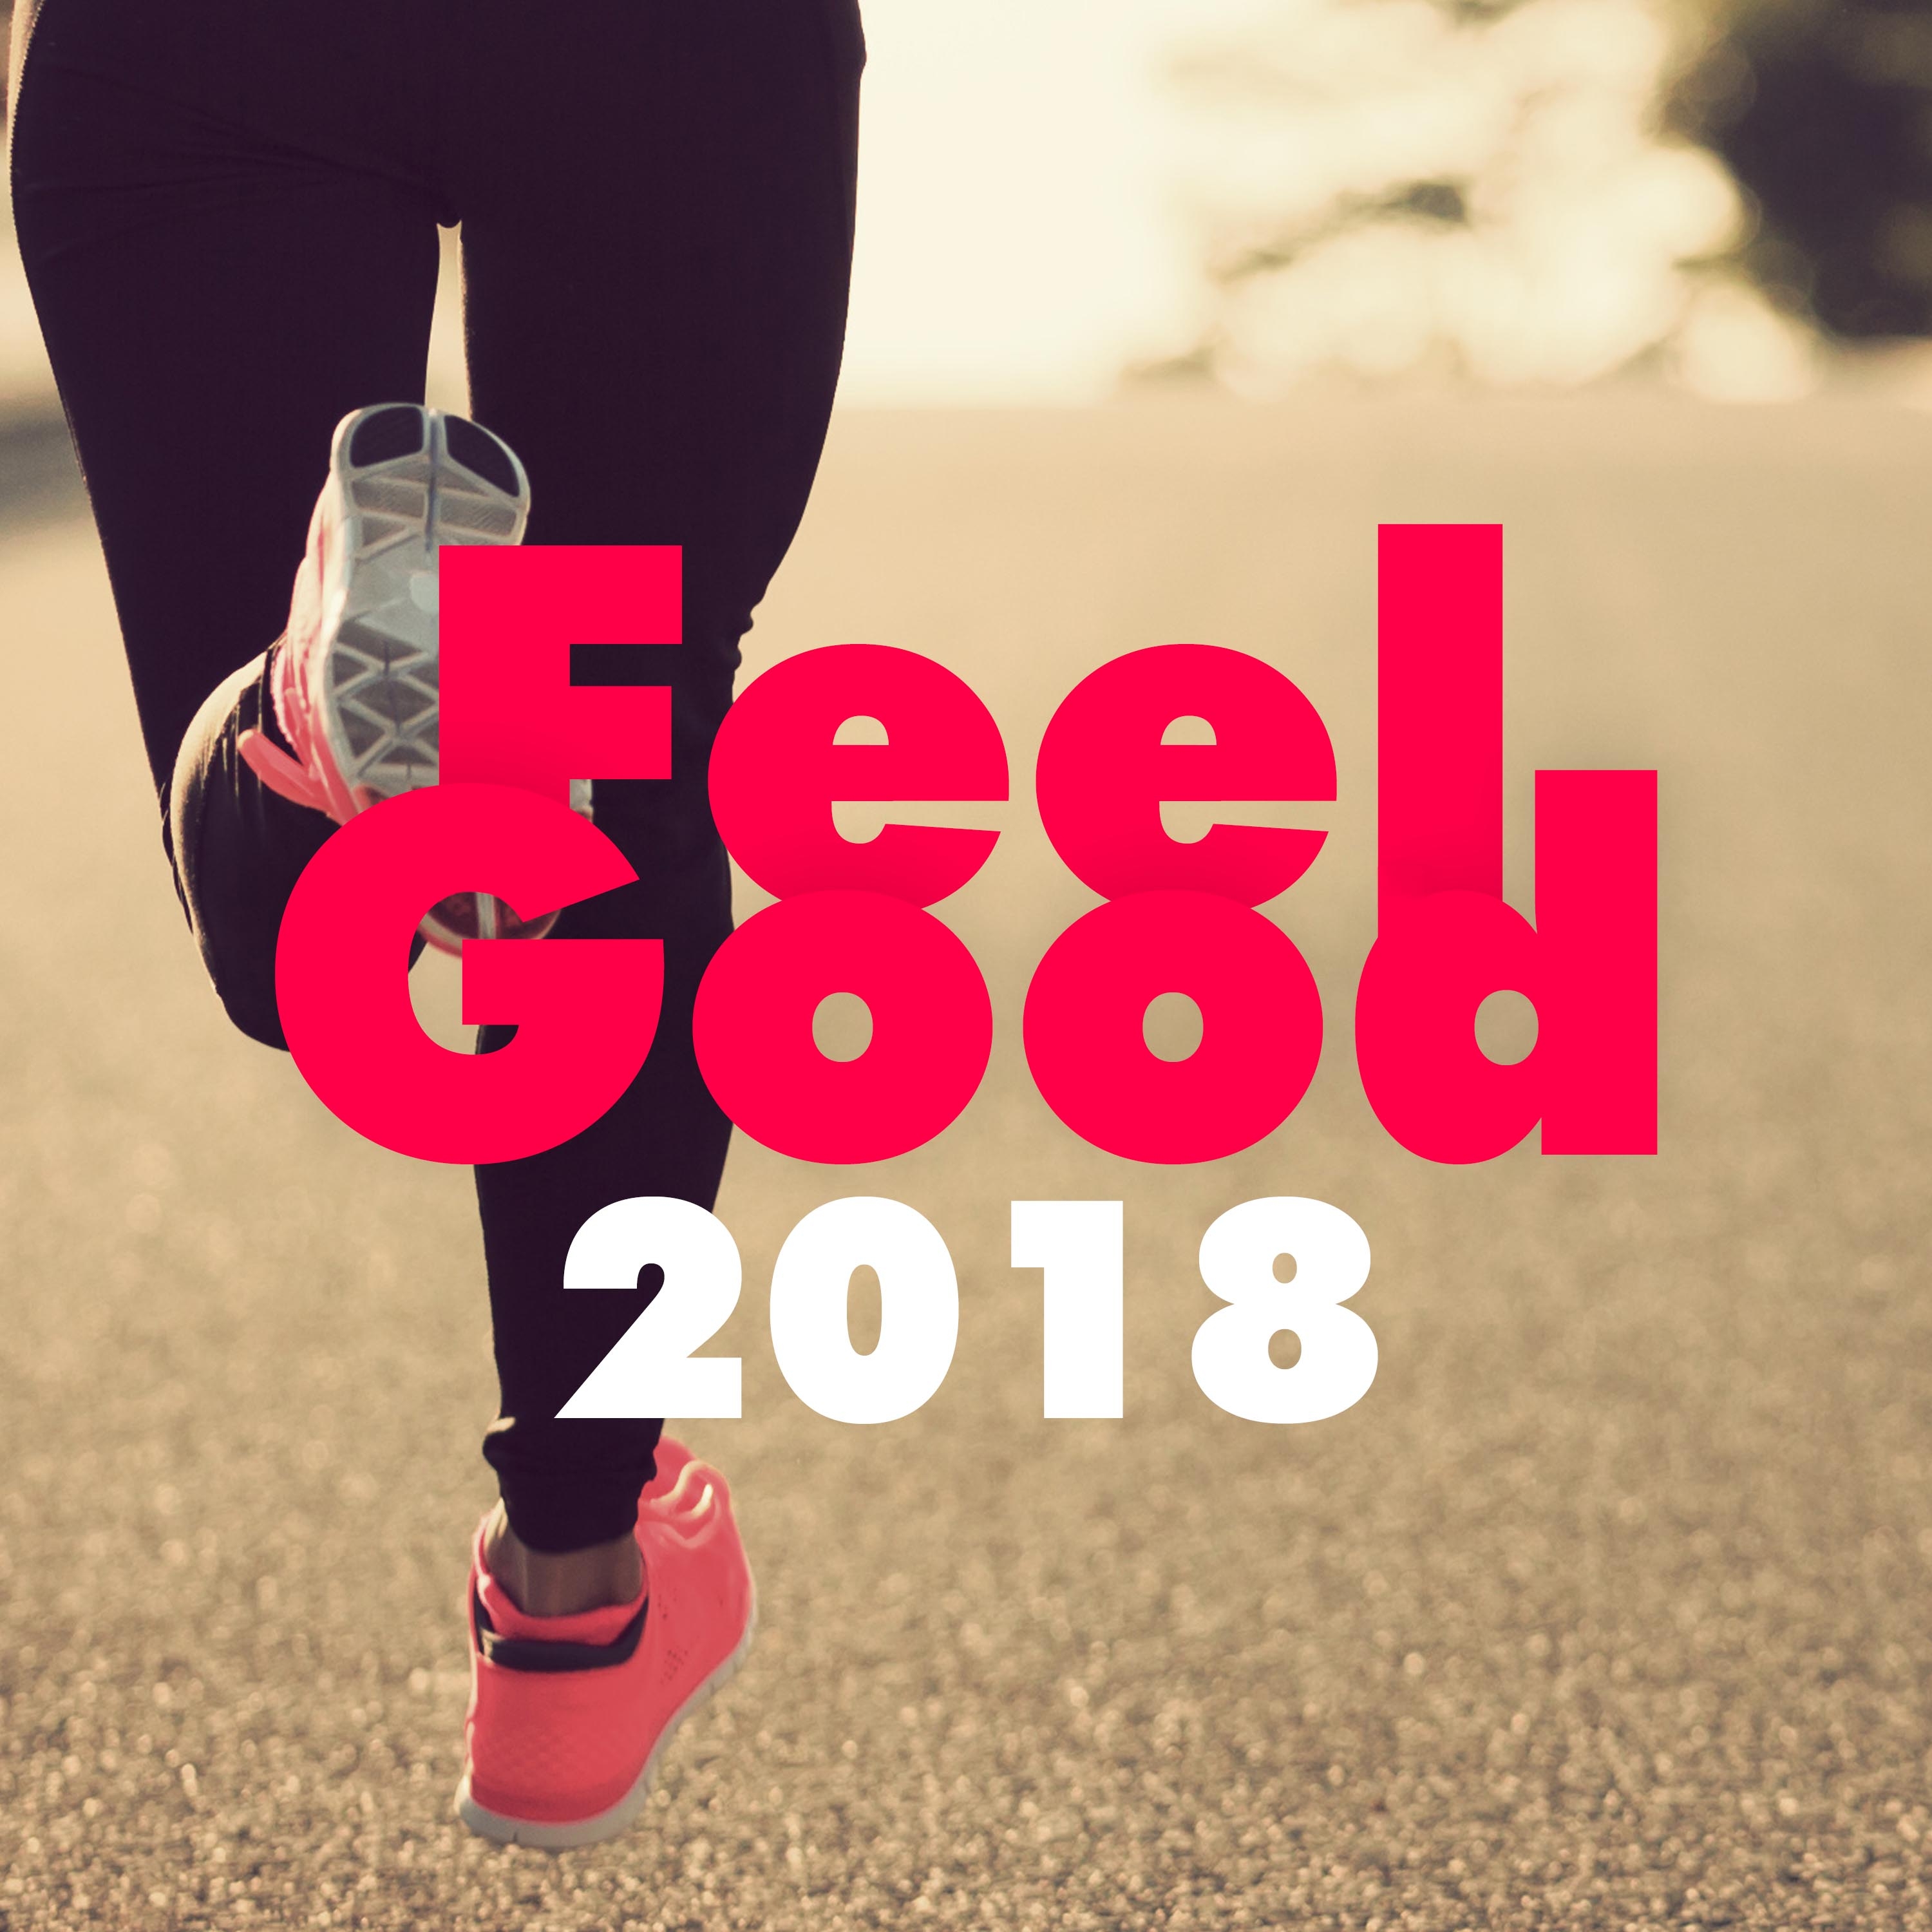 Feel Good 2018 - 1 HOUR of Instrumental Workout Tracks for Cardio & Fitness